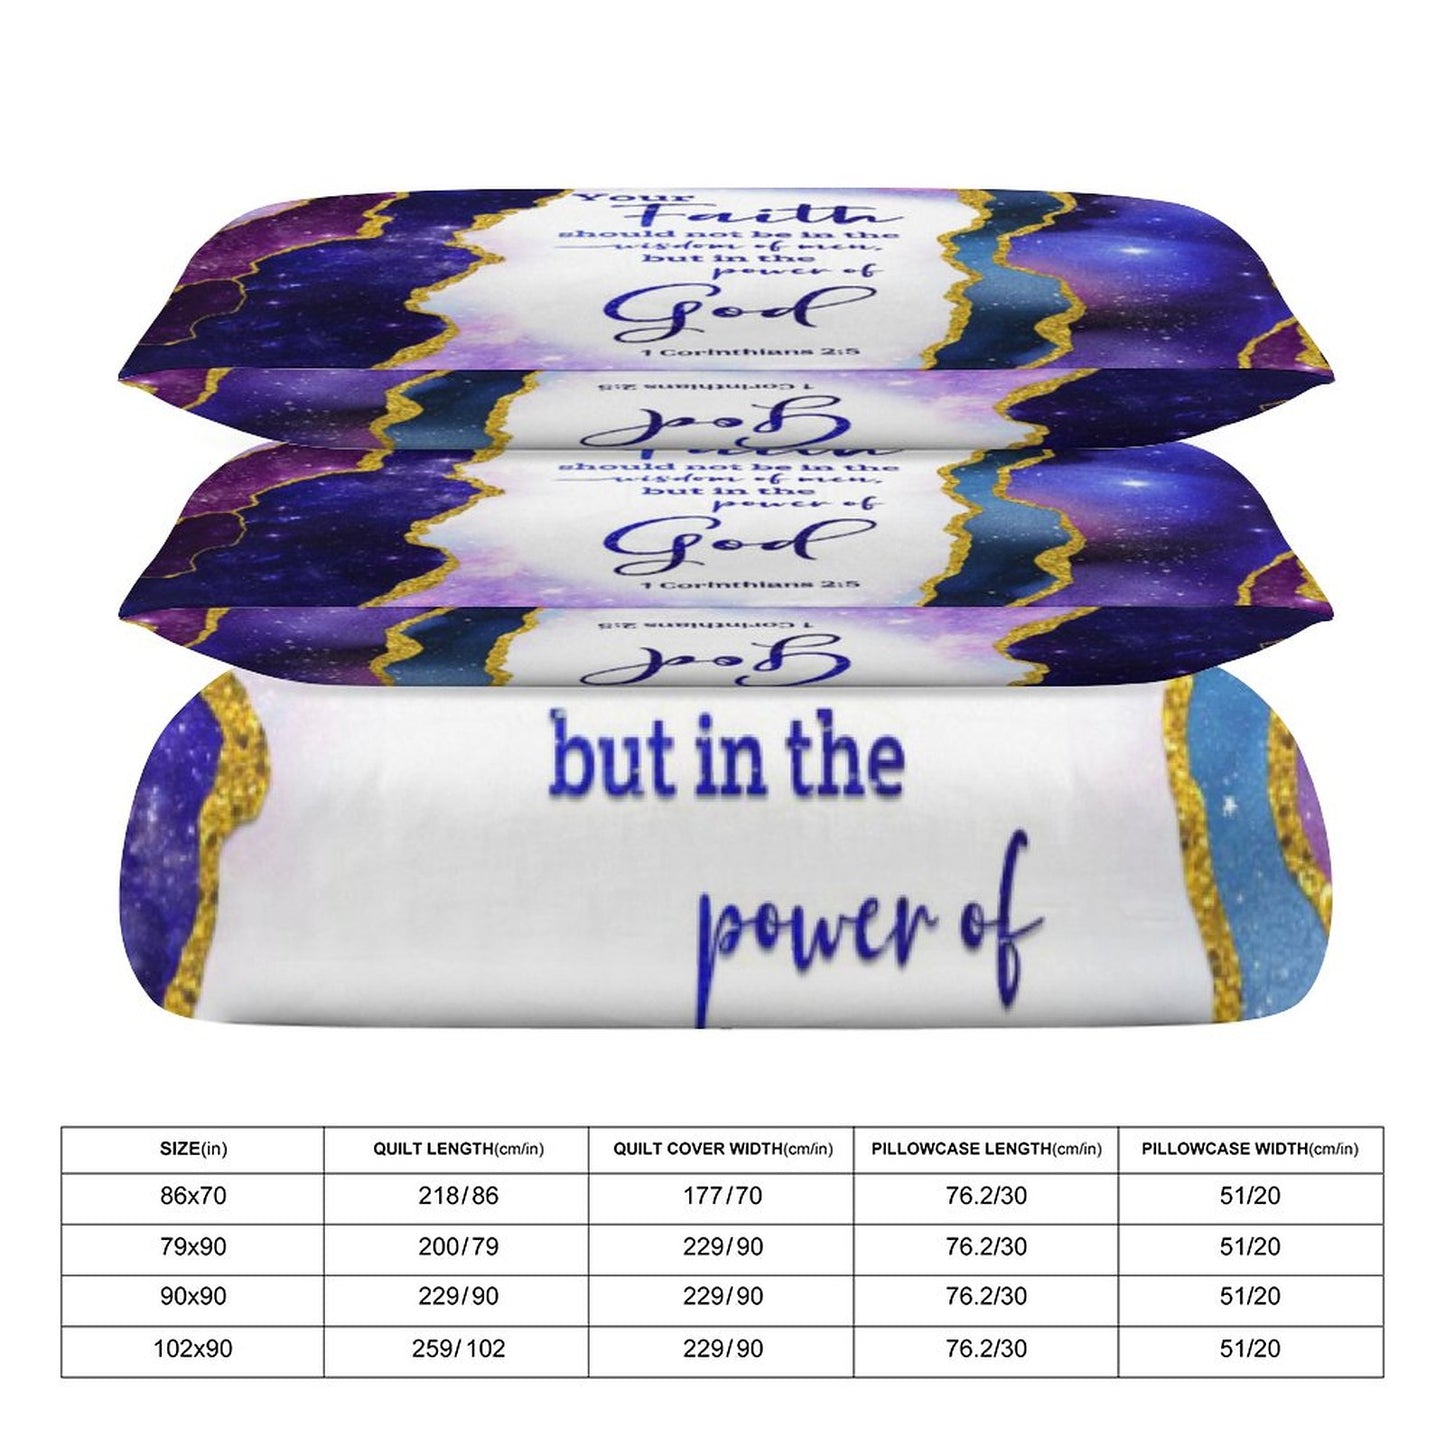 Your Faith Should Be In The Power Of God 3-Piece Christian Comforter Bedding Set-86"×70"/ 218×177cm SALE-Personal Design